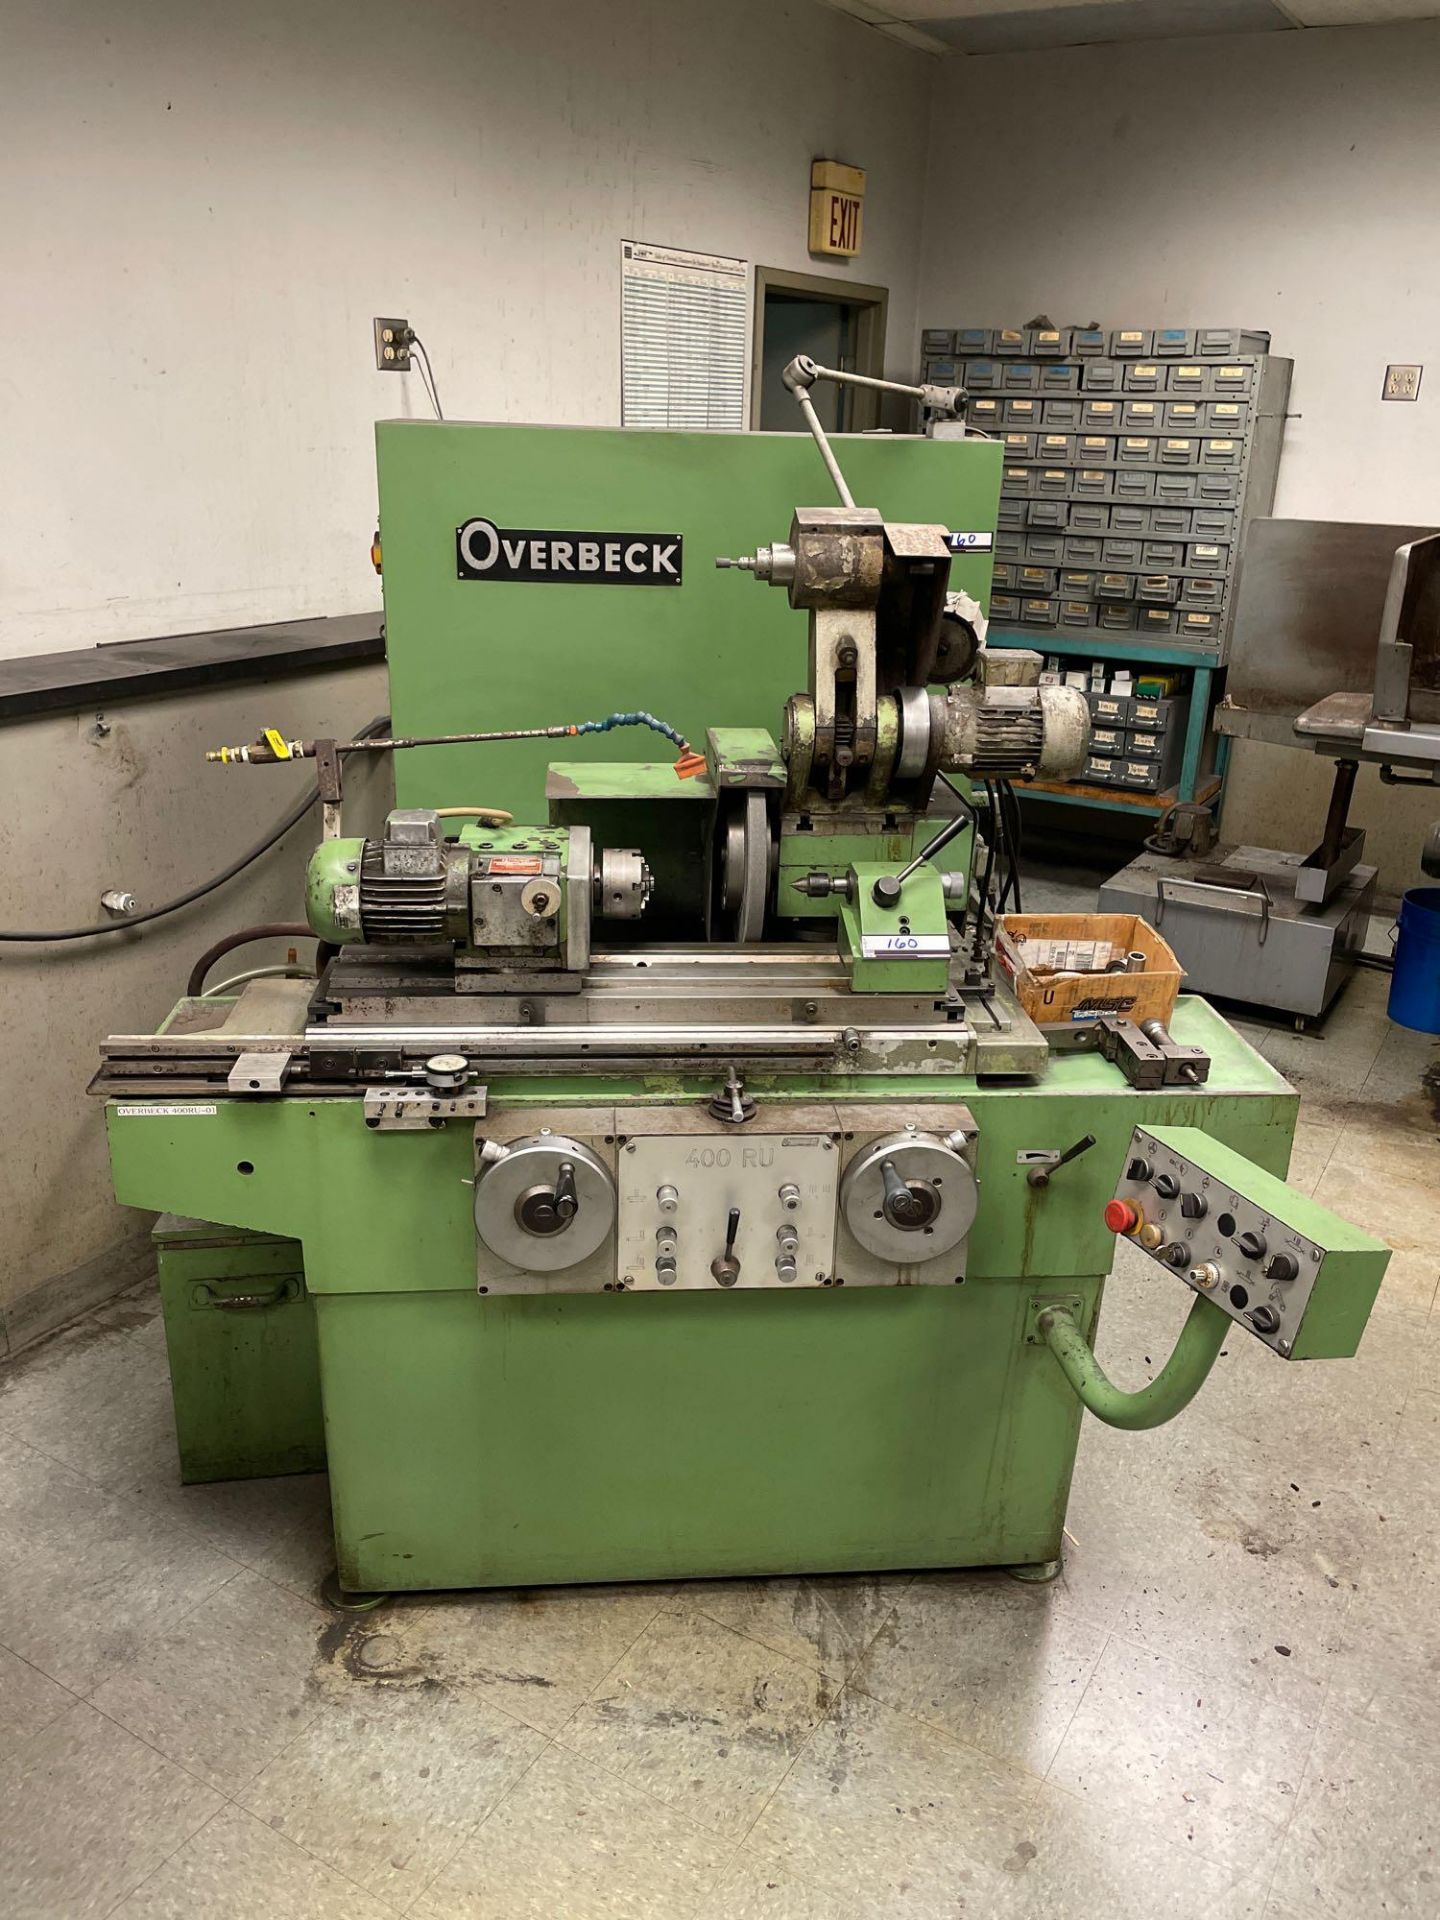 Overbeck 400 RU Universal ID/OD Cylindrical Grinder, swing down ID spindle, auto infeed, dresser - Image 4 of 6